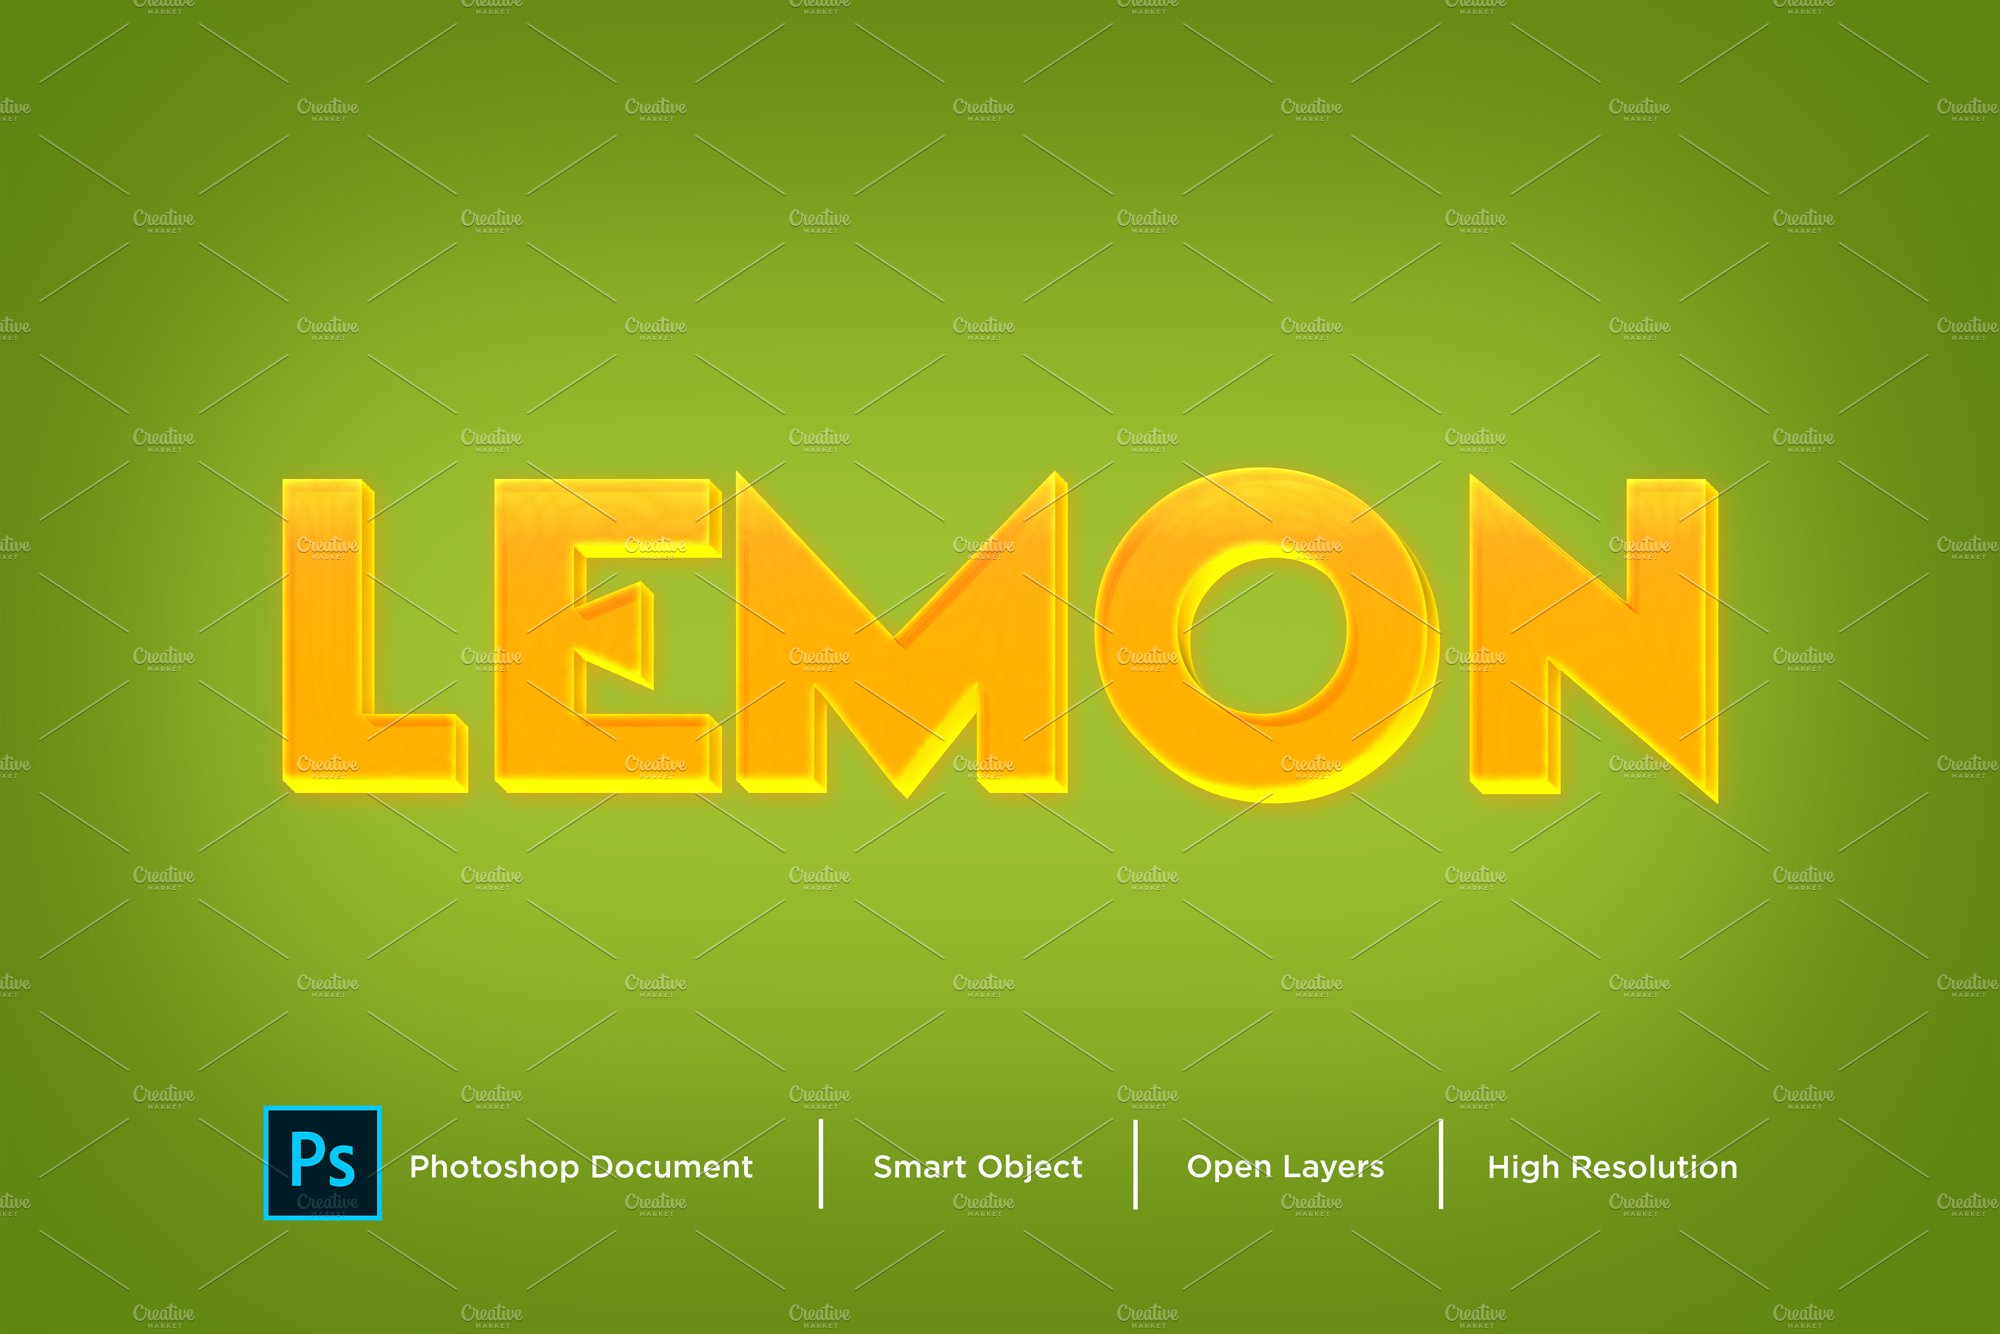 Lemon Text Effect & Layer Stylecover image.